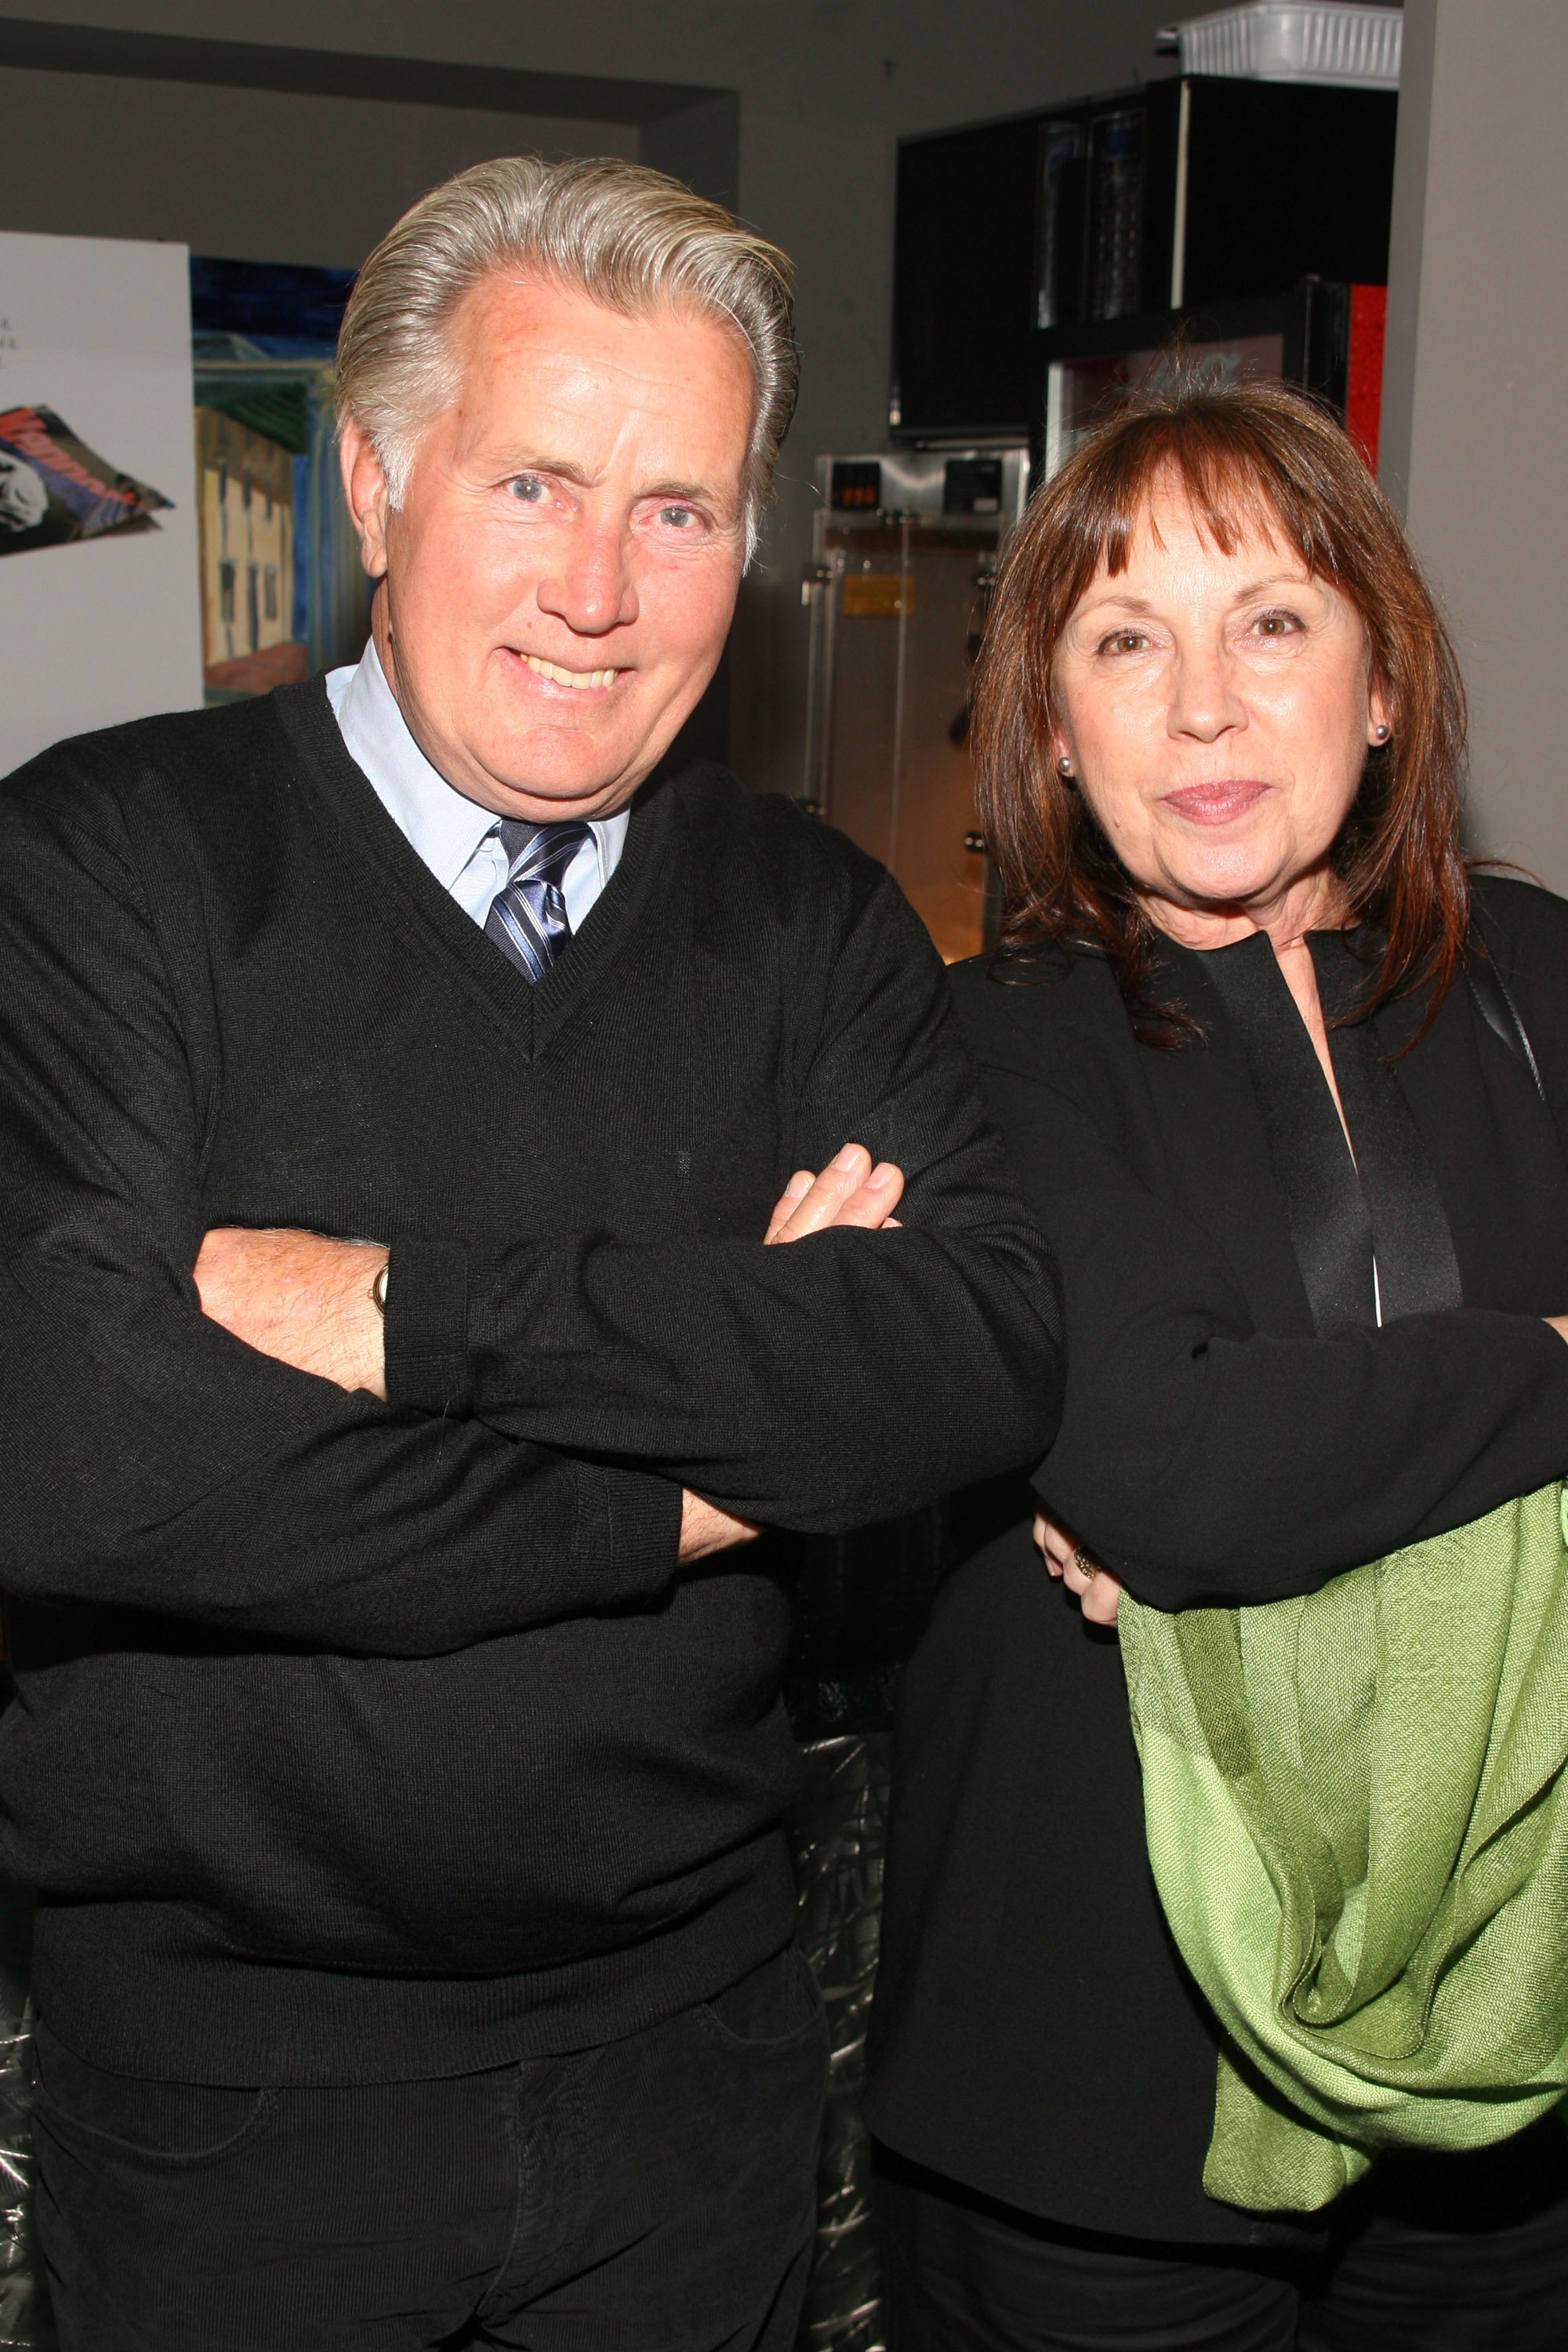 Martin Sheen and Janet Sheen during the Harvey Weinstein Screening of "Bobby" at Disney Screening Room in New York City, New York. / Source: Getty Images